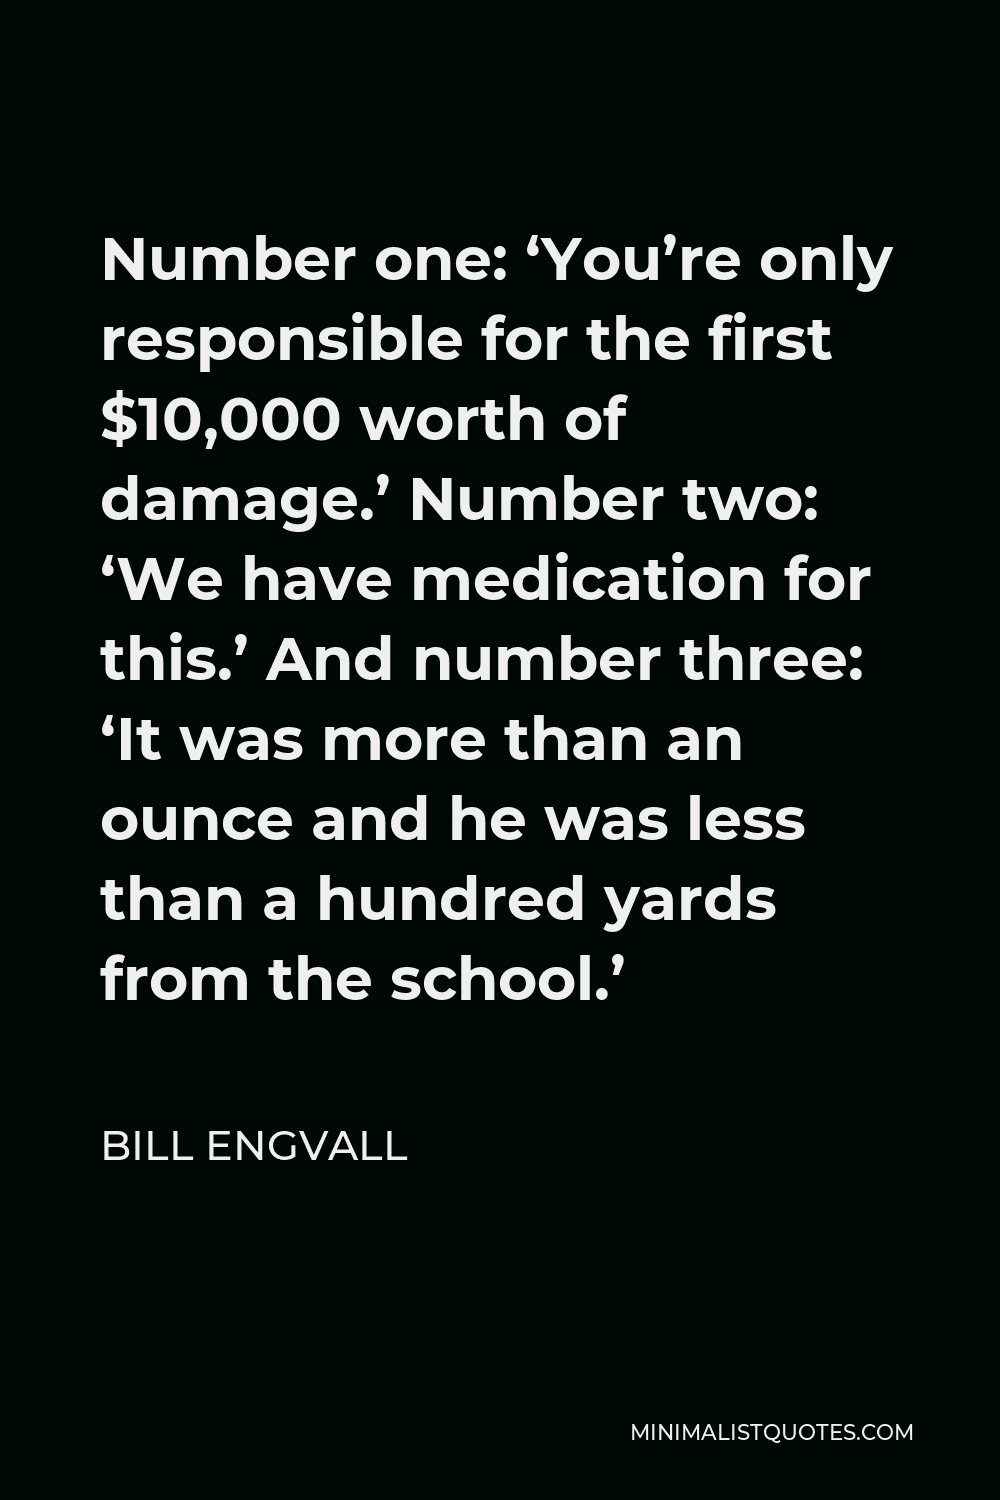 Bill Engvall Quote - Number one: ‘You’re only responsible for the first $10,000 worth of damage.’ Number two: ‘We have medication for this.’ And number three: ‘It was more than an ounce and he was less than a hundred yards from the school.’